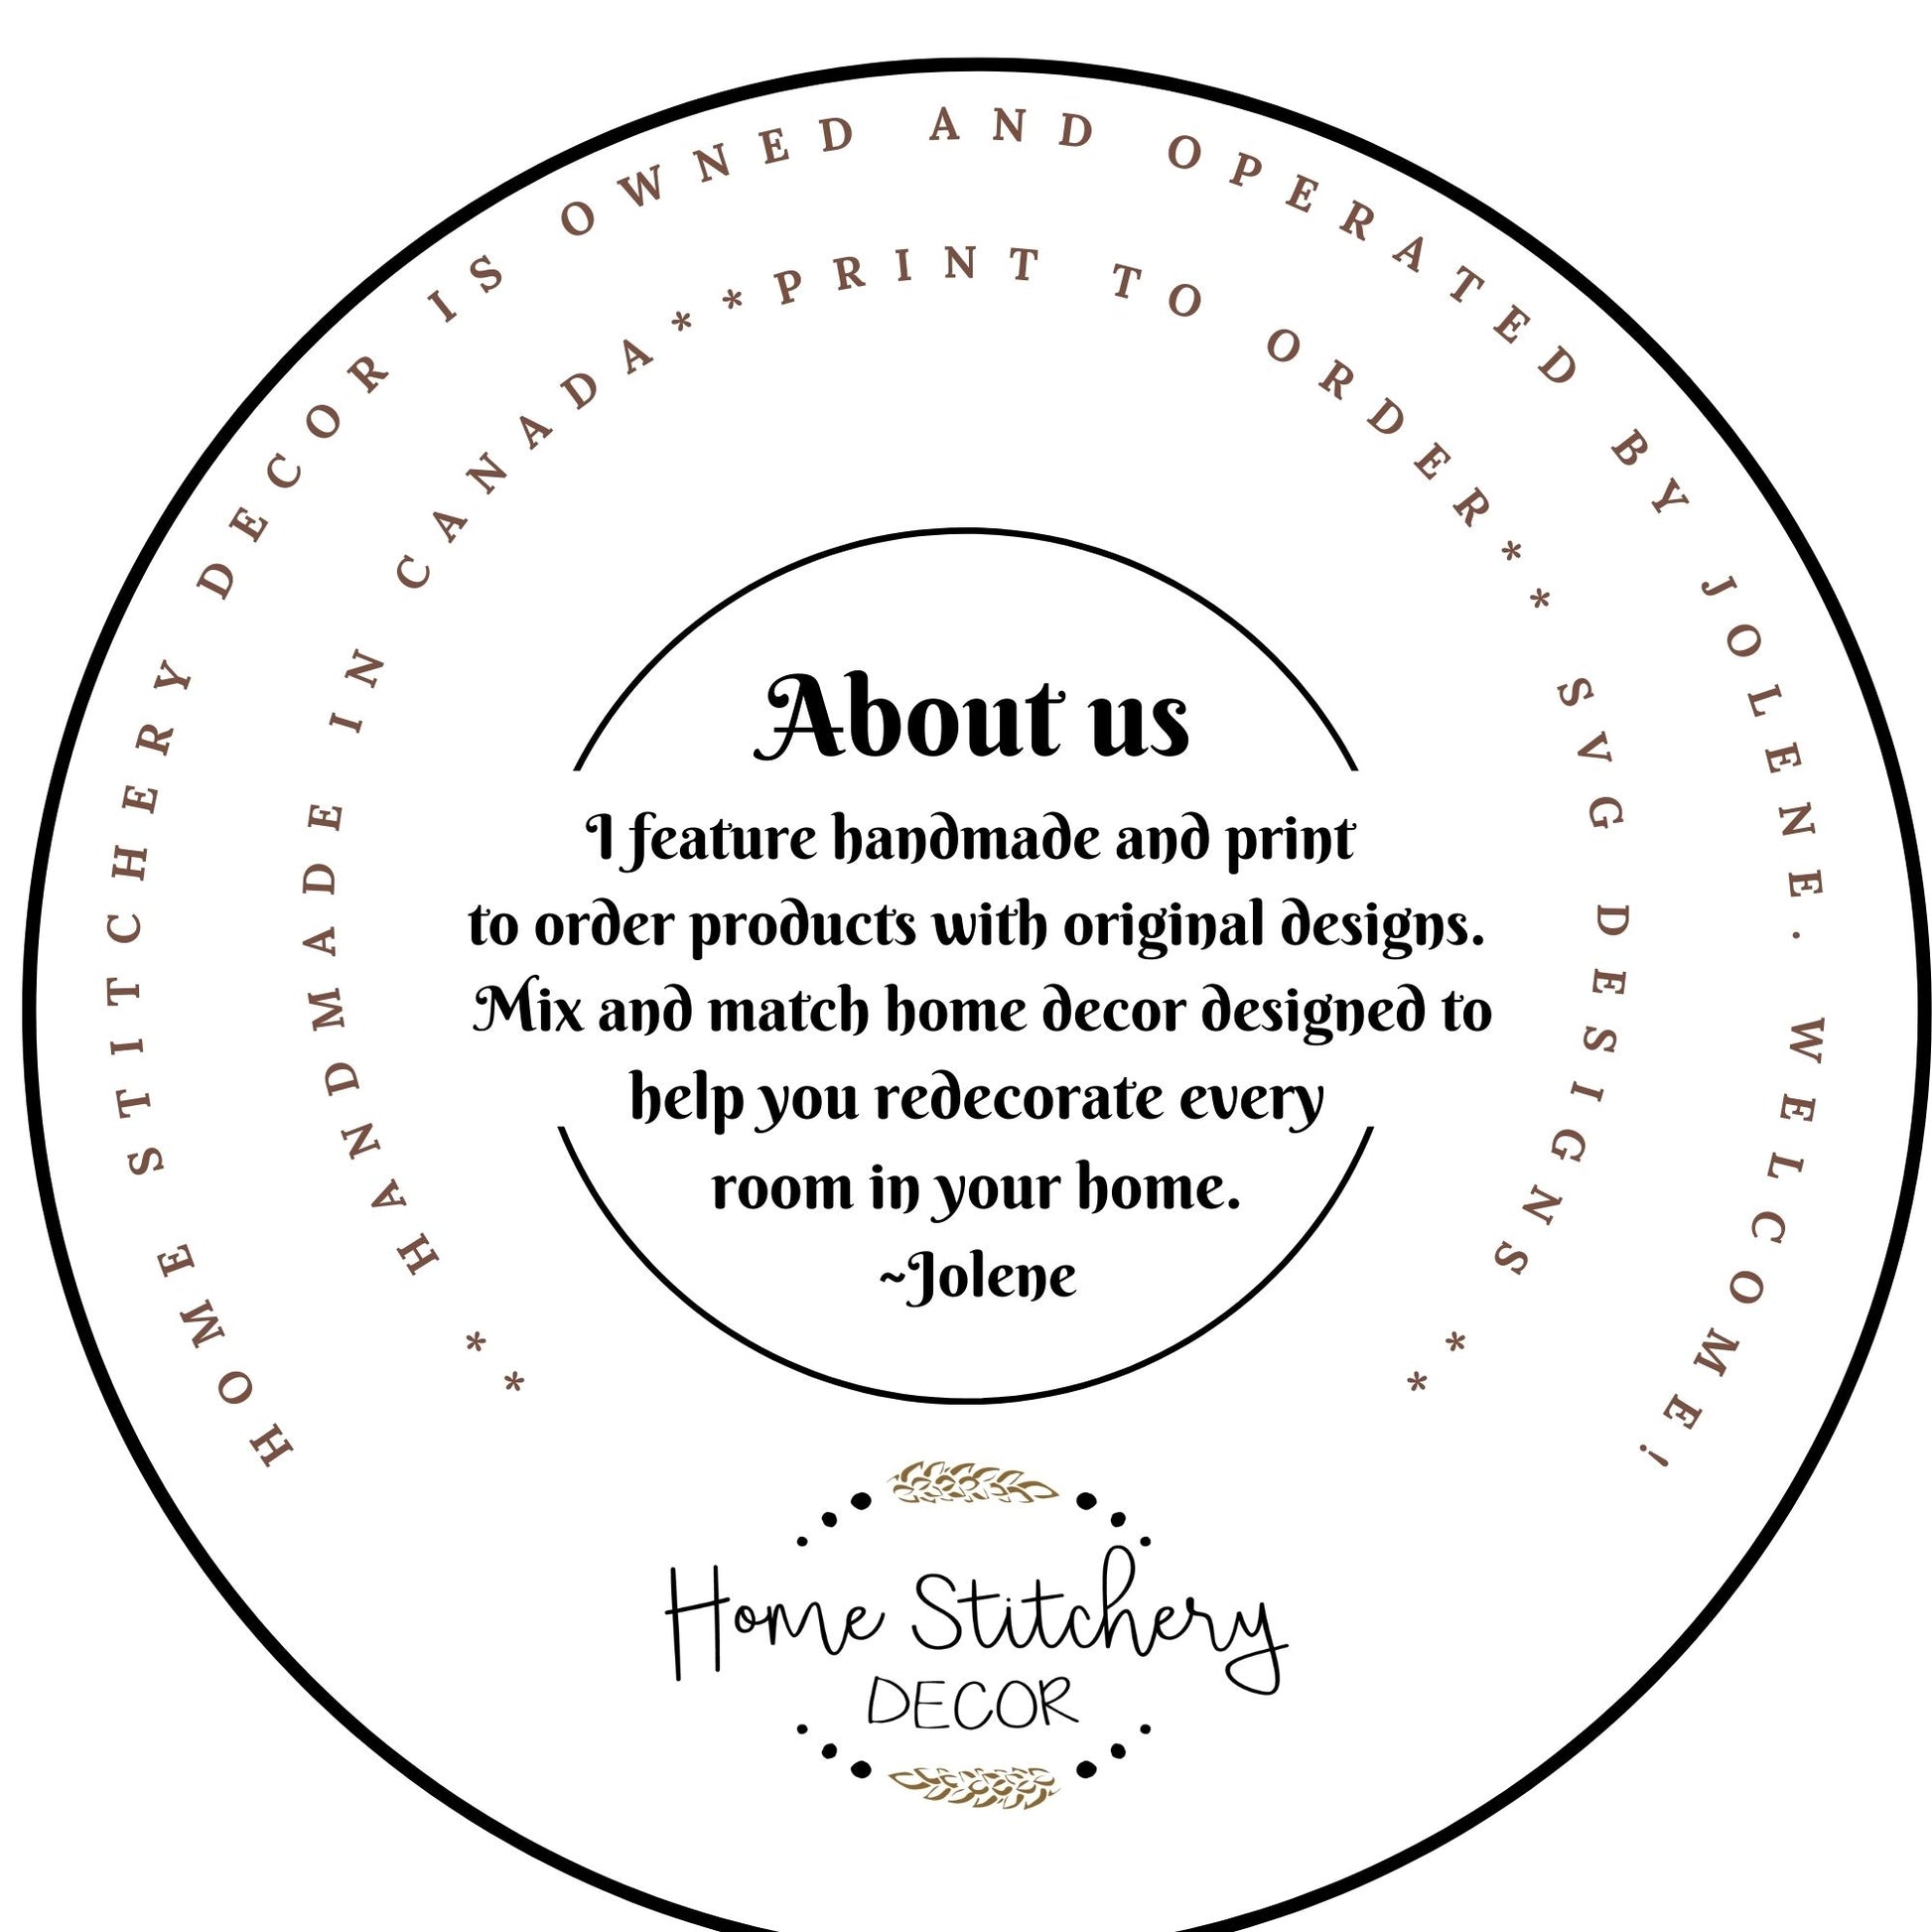 About us, Home Stitchery Decor is located in Calgary Alberta, Canada. We feature handmade and print to order products featuring our own original art work.  Mix and match collections of home decor.